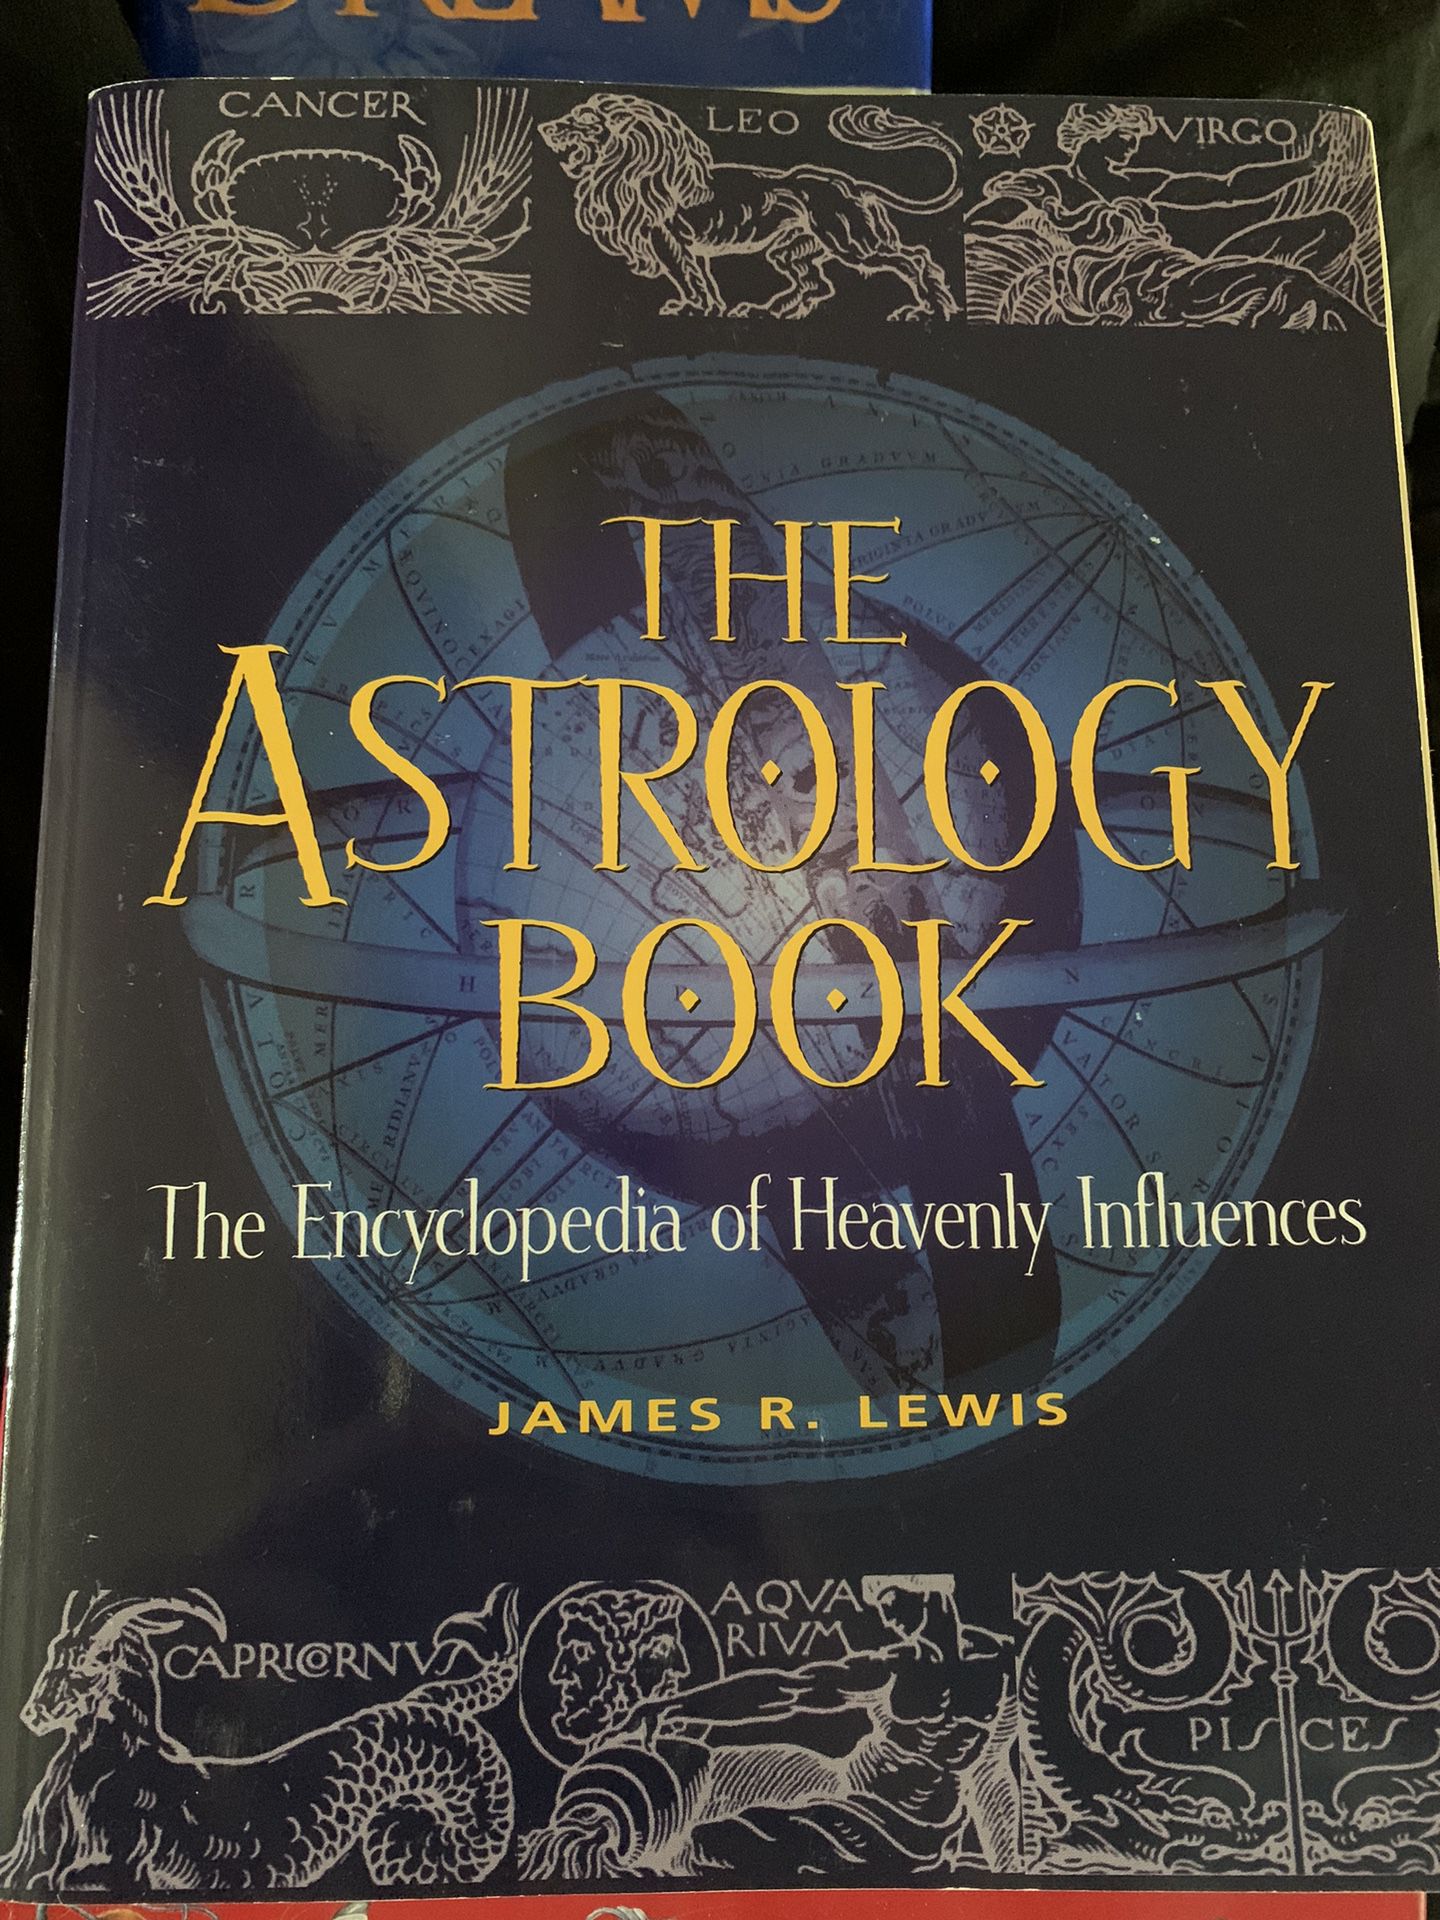 The ASTROLOGY book